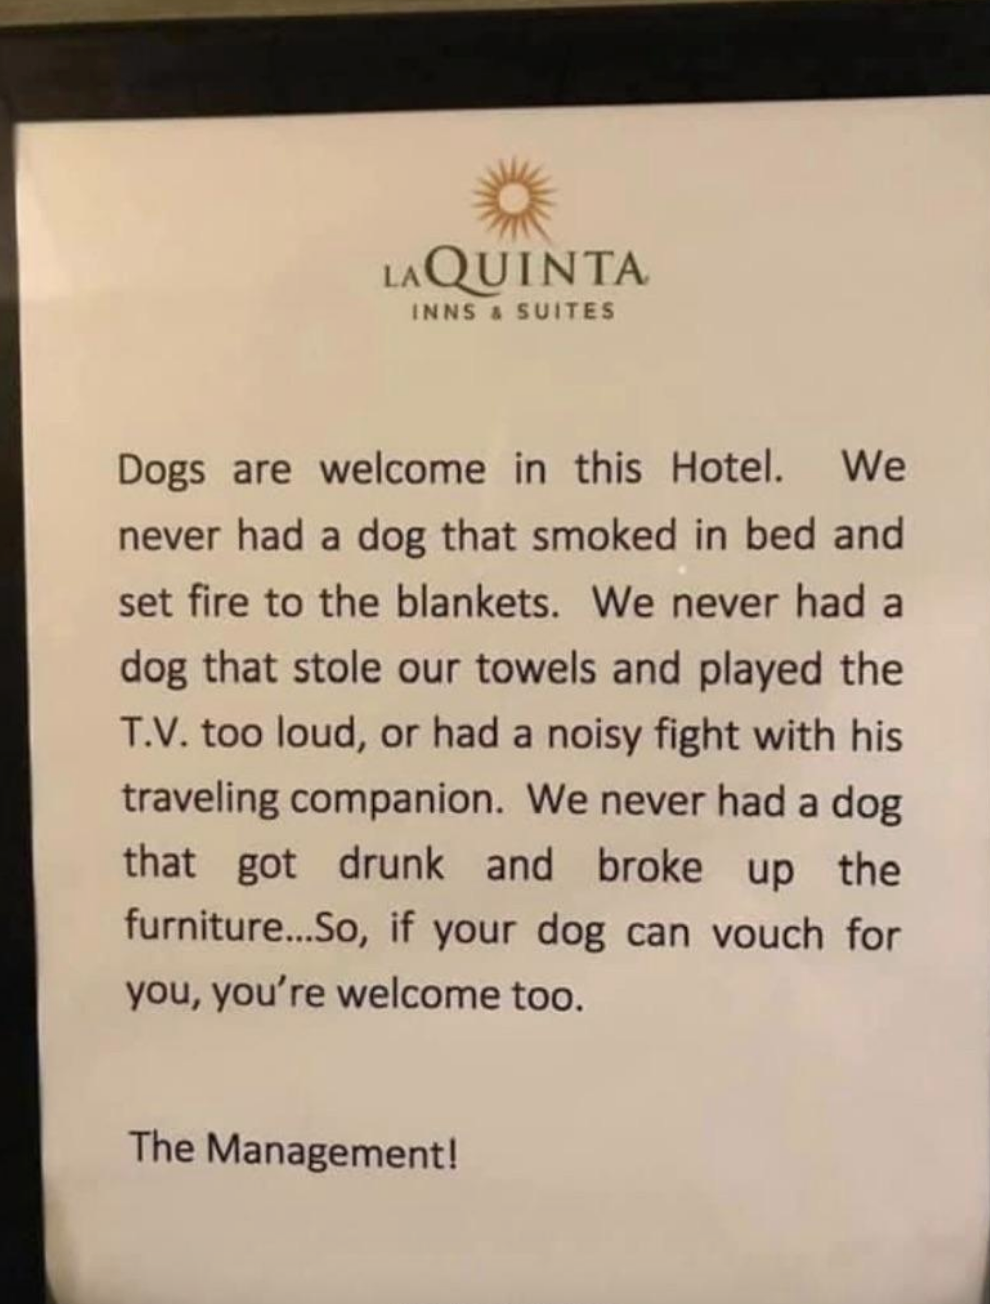 Sign says, Dogs are welcome in this hotel. We never had a dog that smoked in bed and set fire to the blankets... We never had a dog that got drunk and broke up the furniture. If your dog can vouch for you, you&#x27;re welcome too